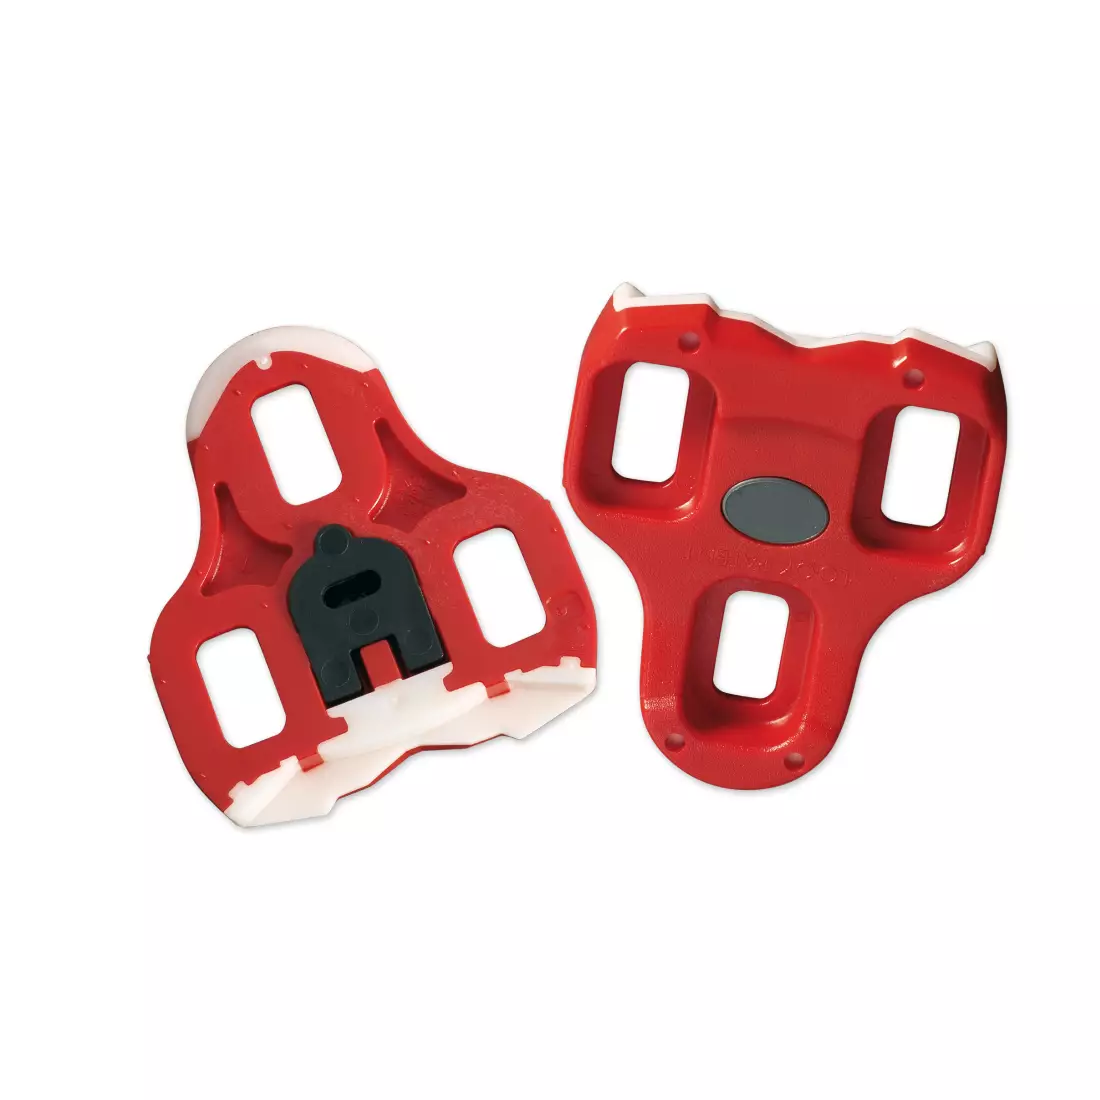 LOOK SS18 KEO pedal cleats 00008149 red 9